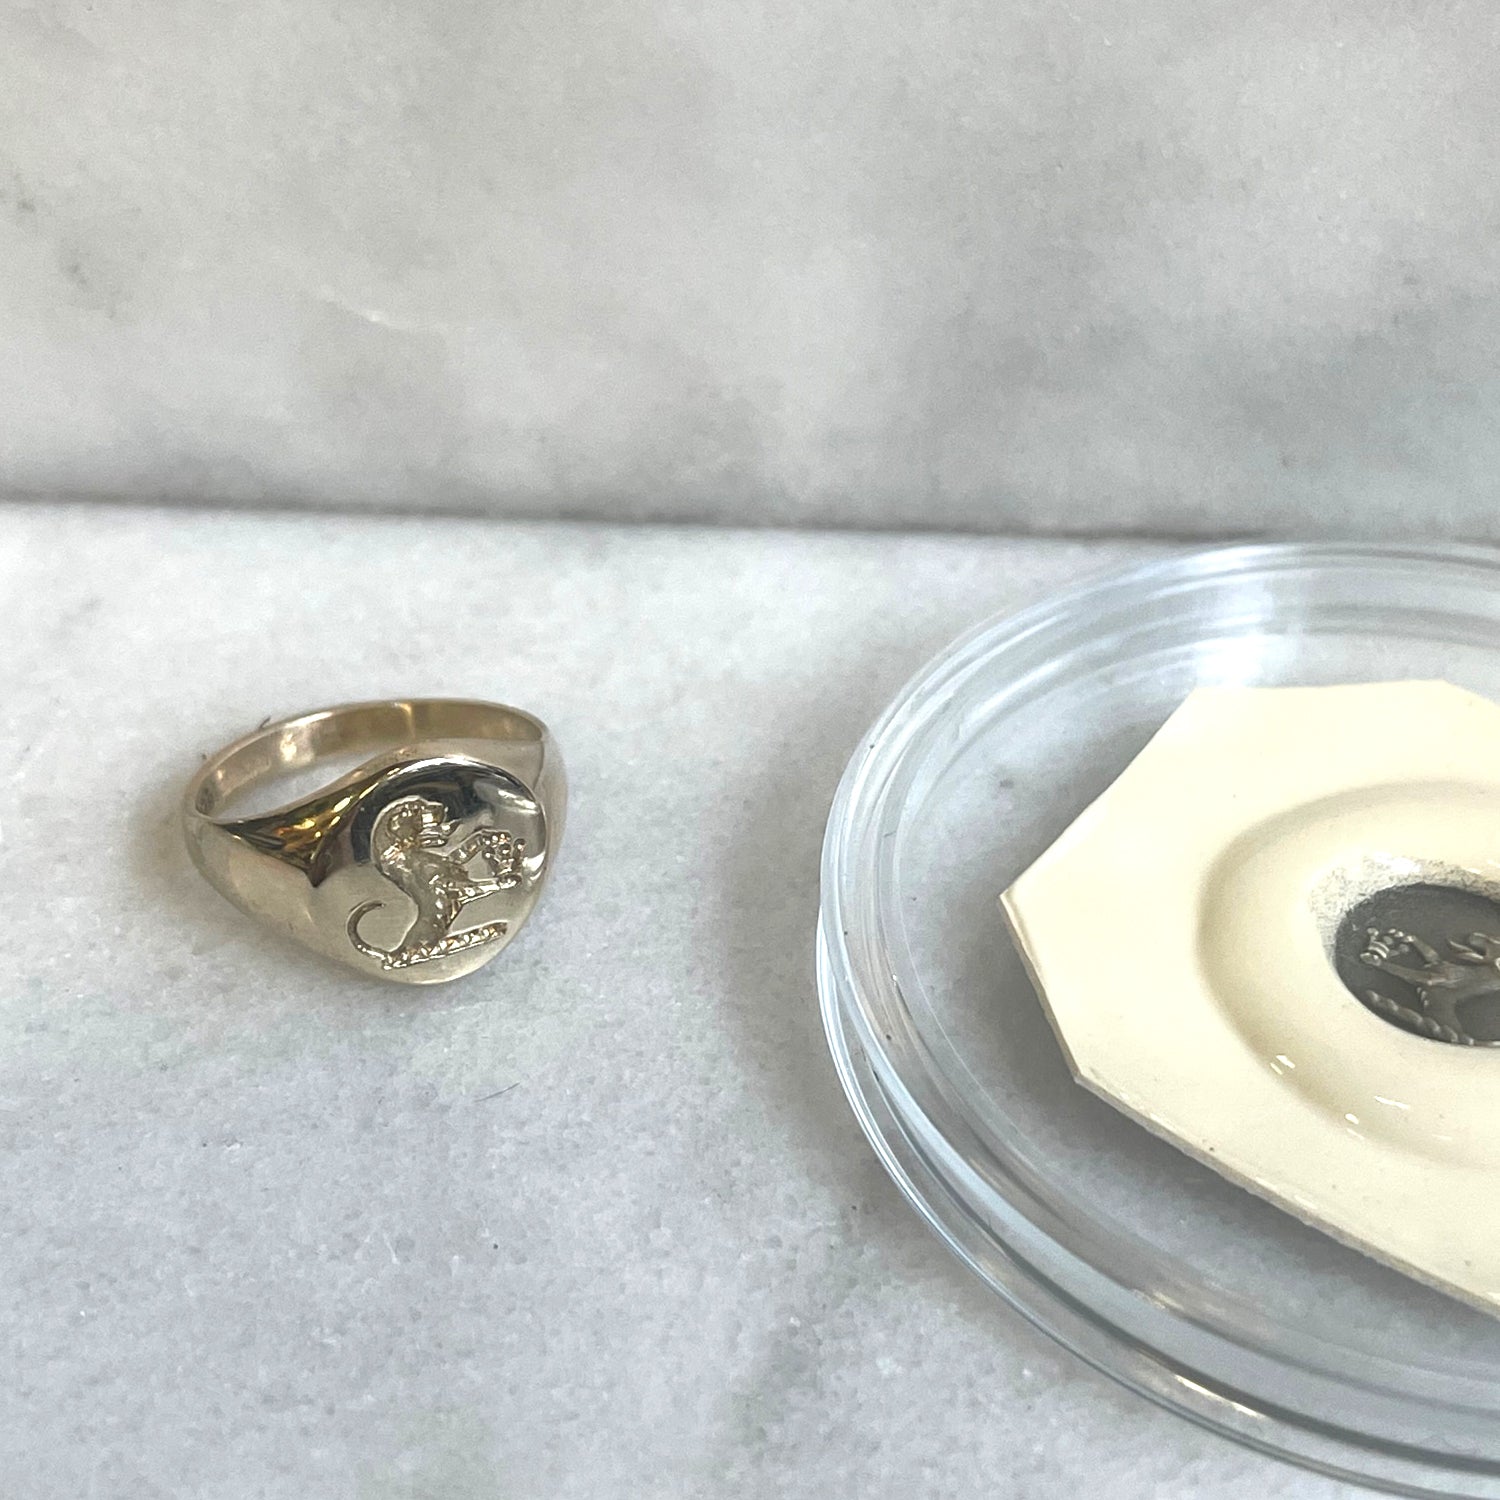 Hand Engraved Crest 9k Yellow Gold Round Signet Ring - From Your Design - 11mm